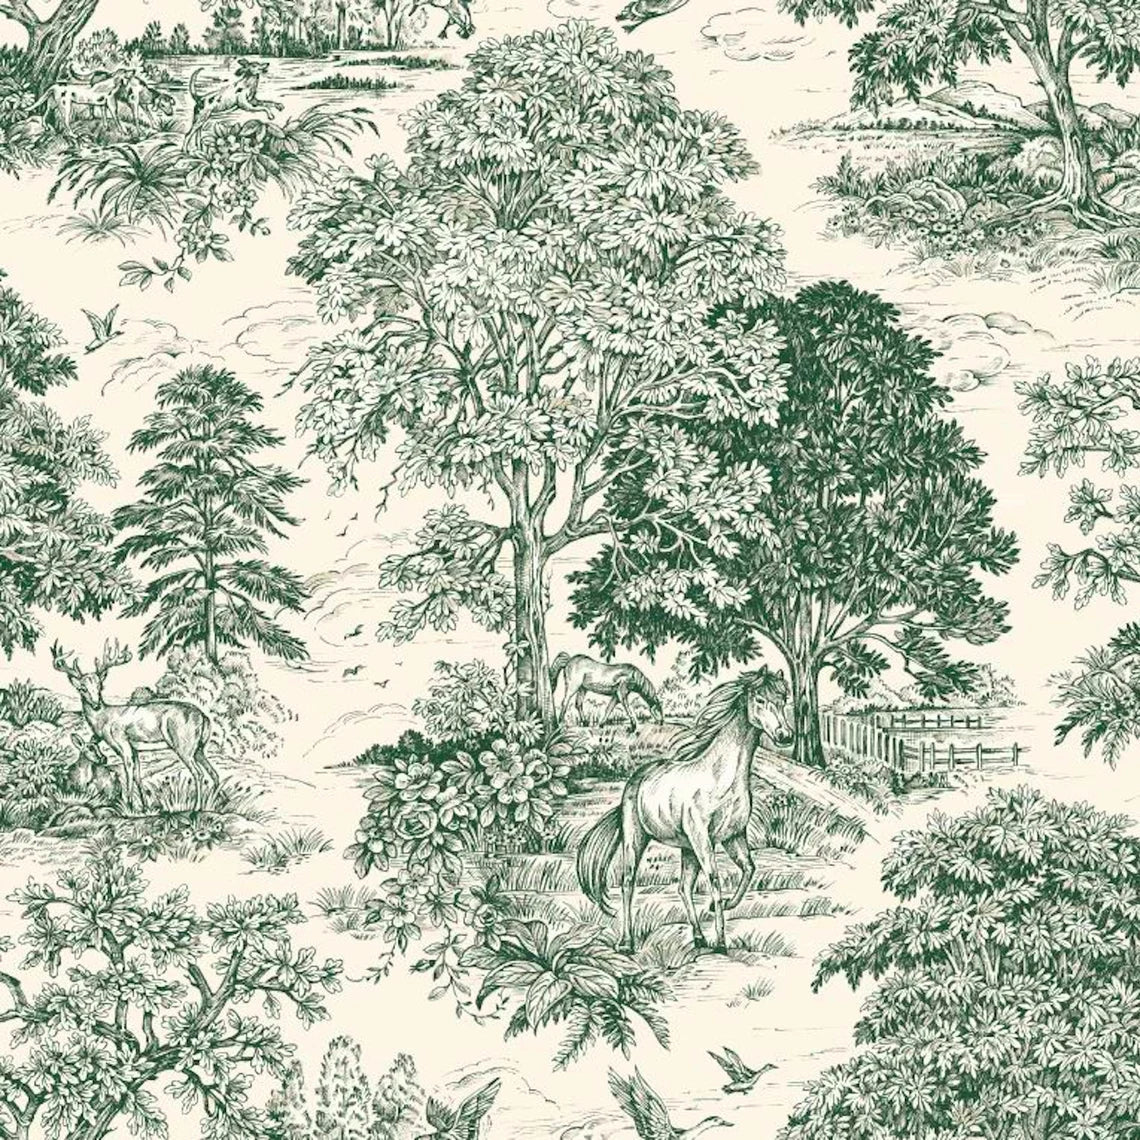 rod pocket curtain panels pair in Yellowstone Classic Green Country Toile- Horses, Deer, Dogs- Large Scale